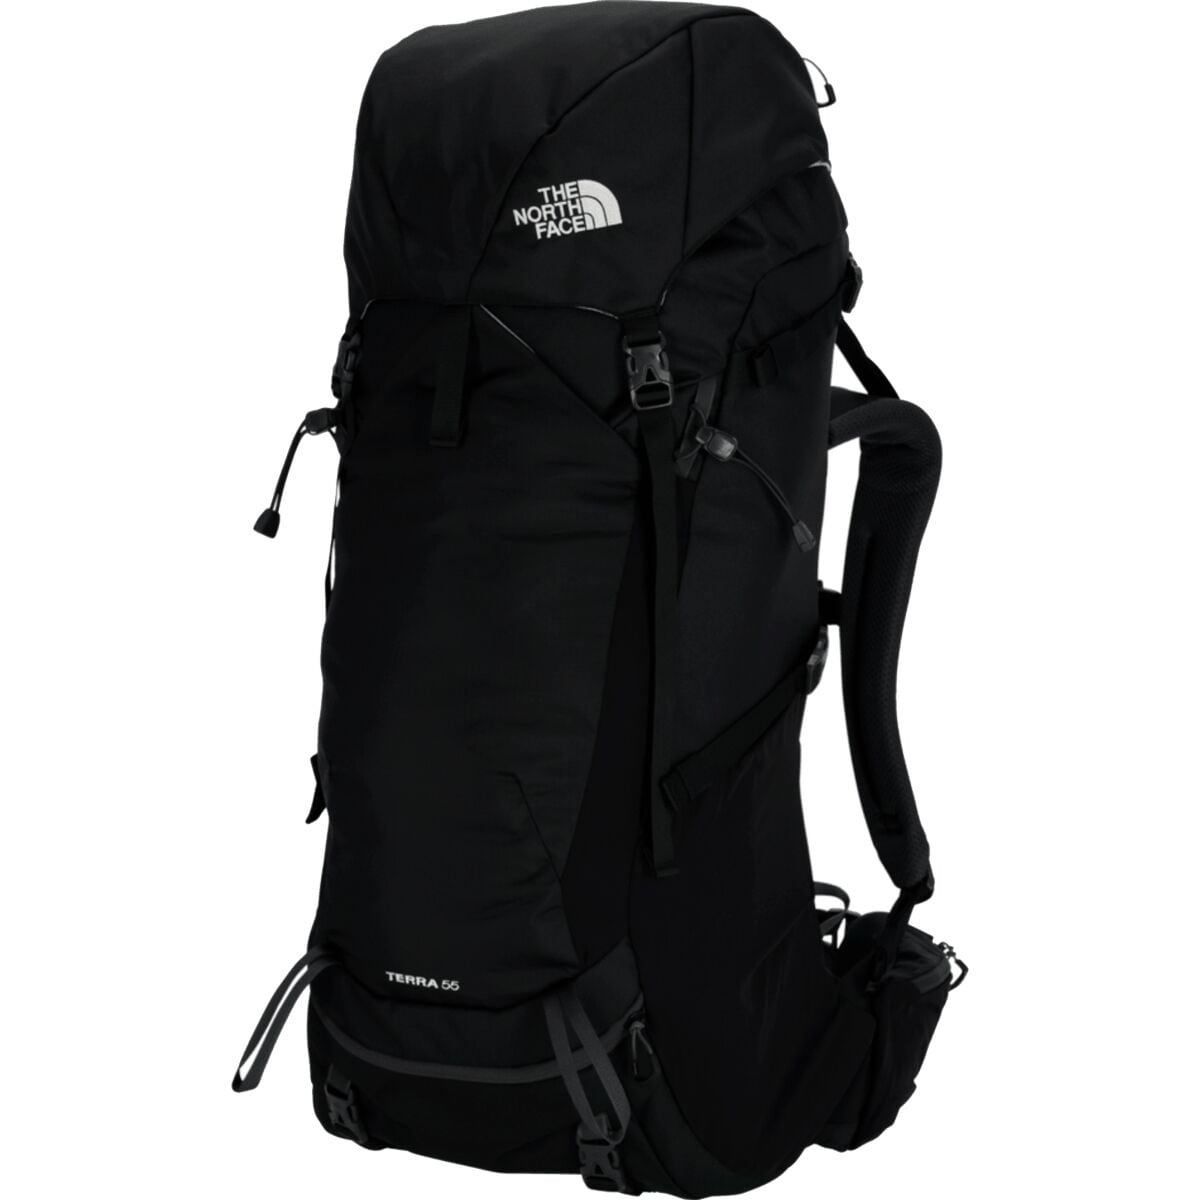 Photos - Backpack The North Face Terra 55L  